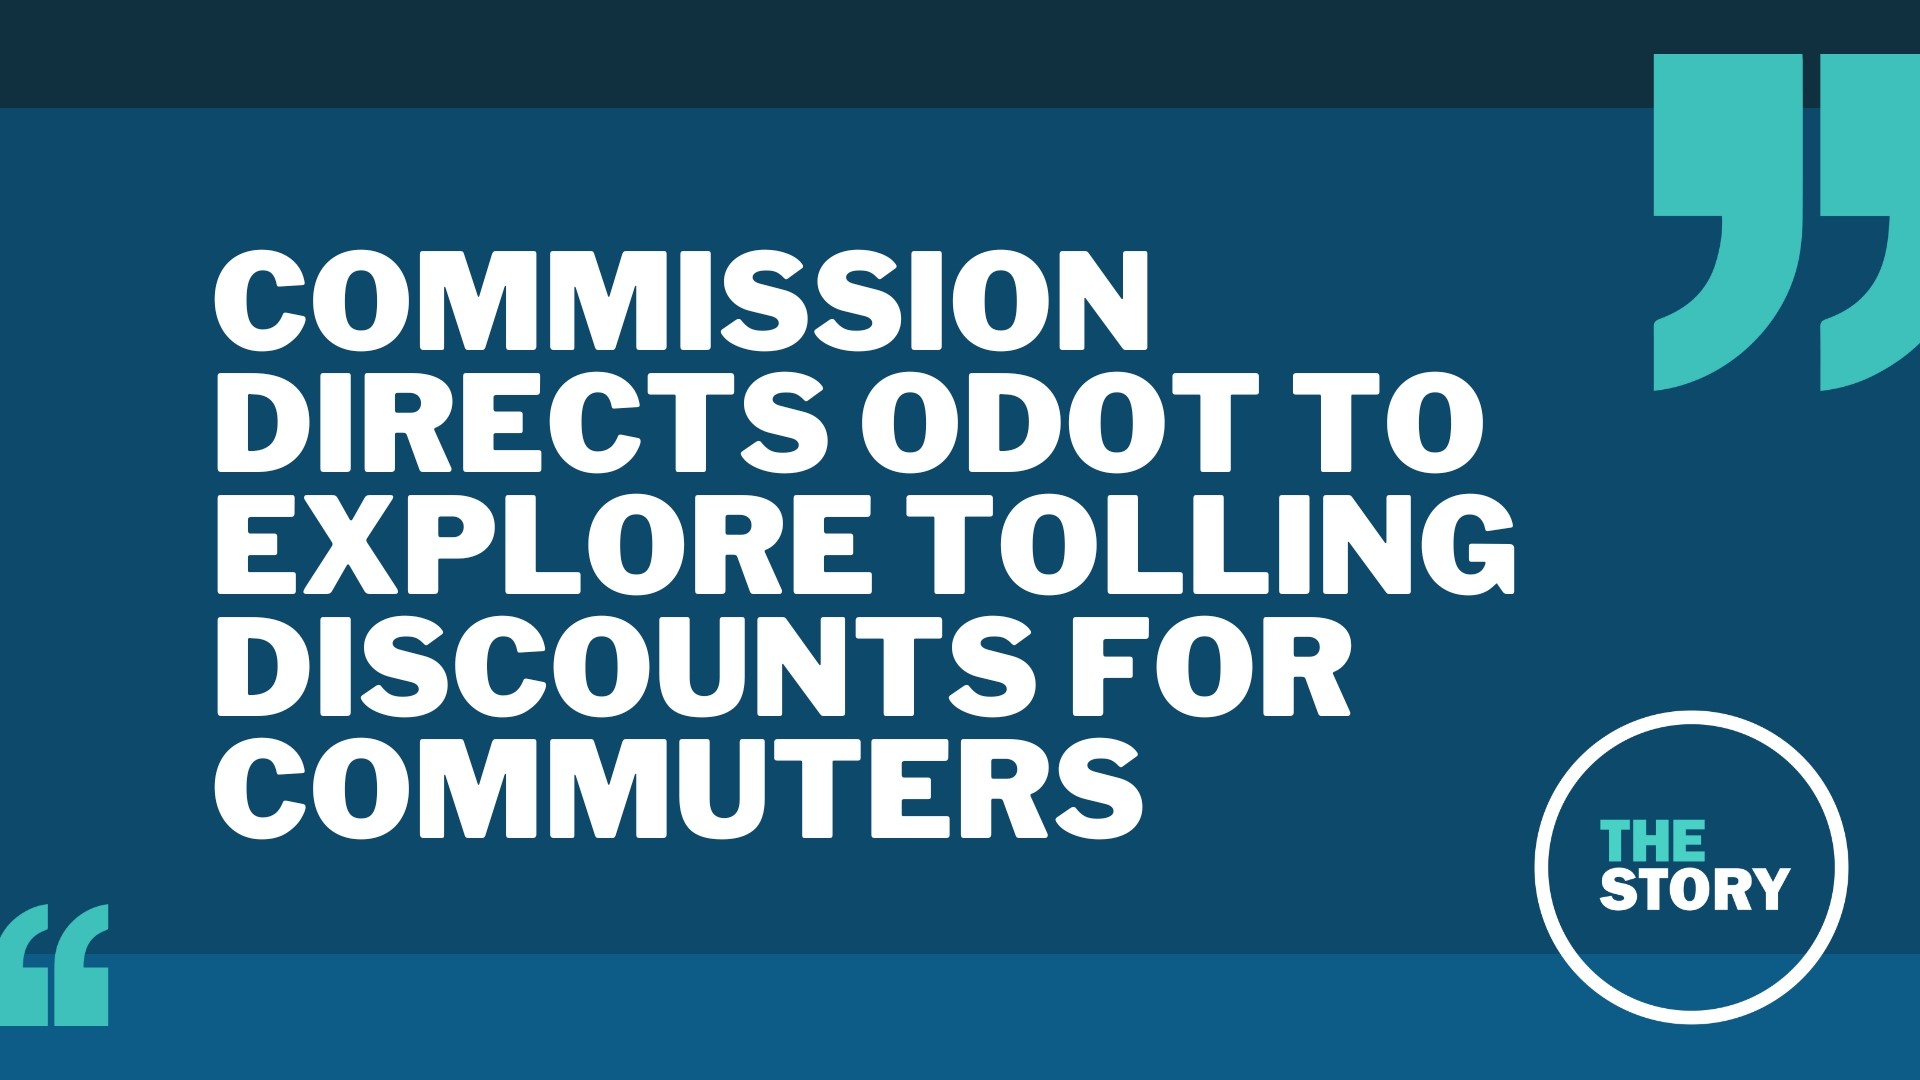 The Oregon Transportation Commission, which will make all of the final decisions on tolling, hasn’t yet adopted prices. However, it is considering discounts.